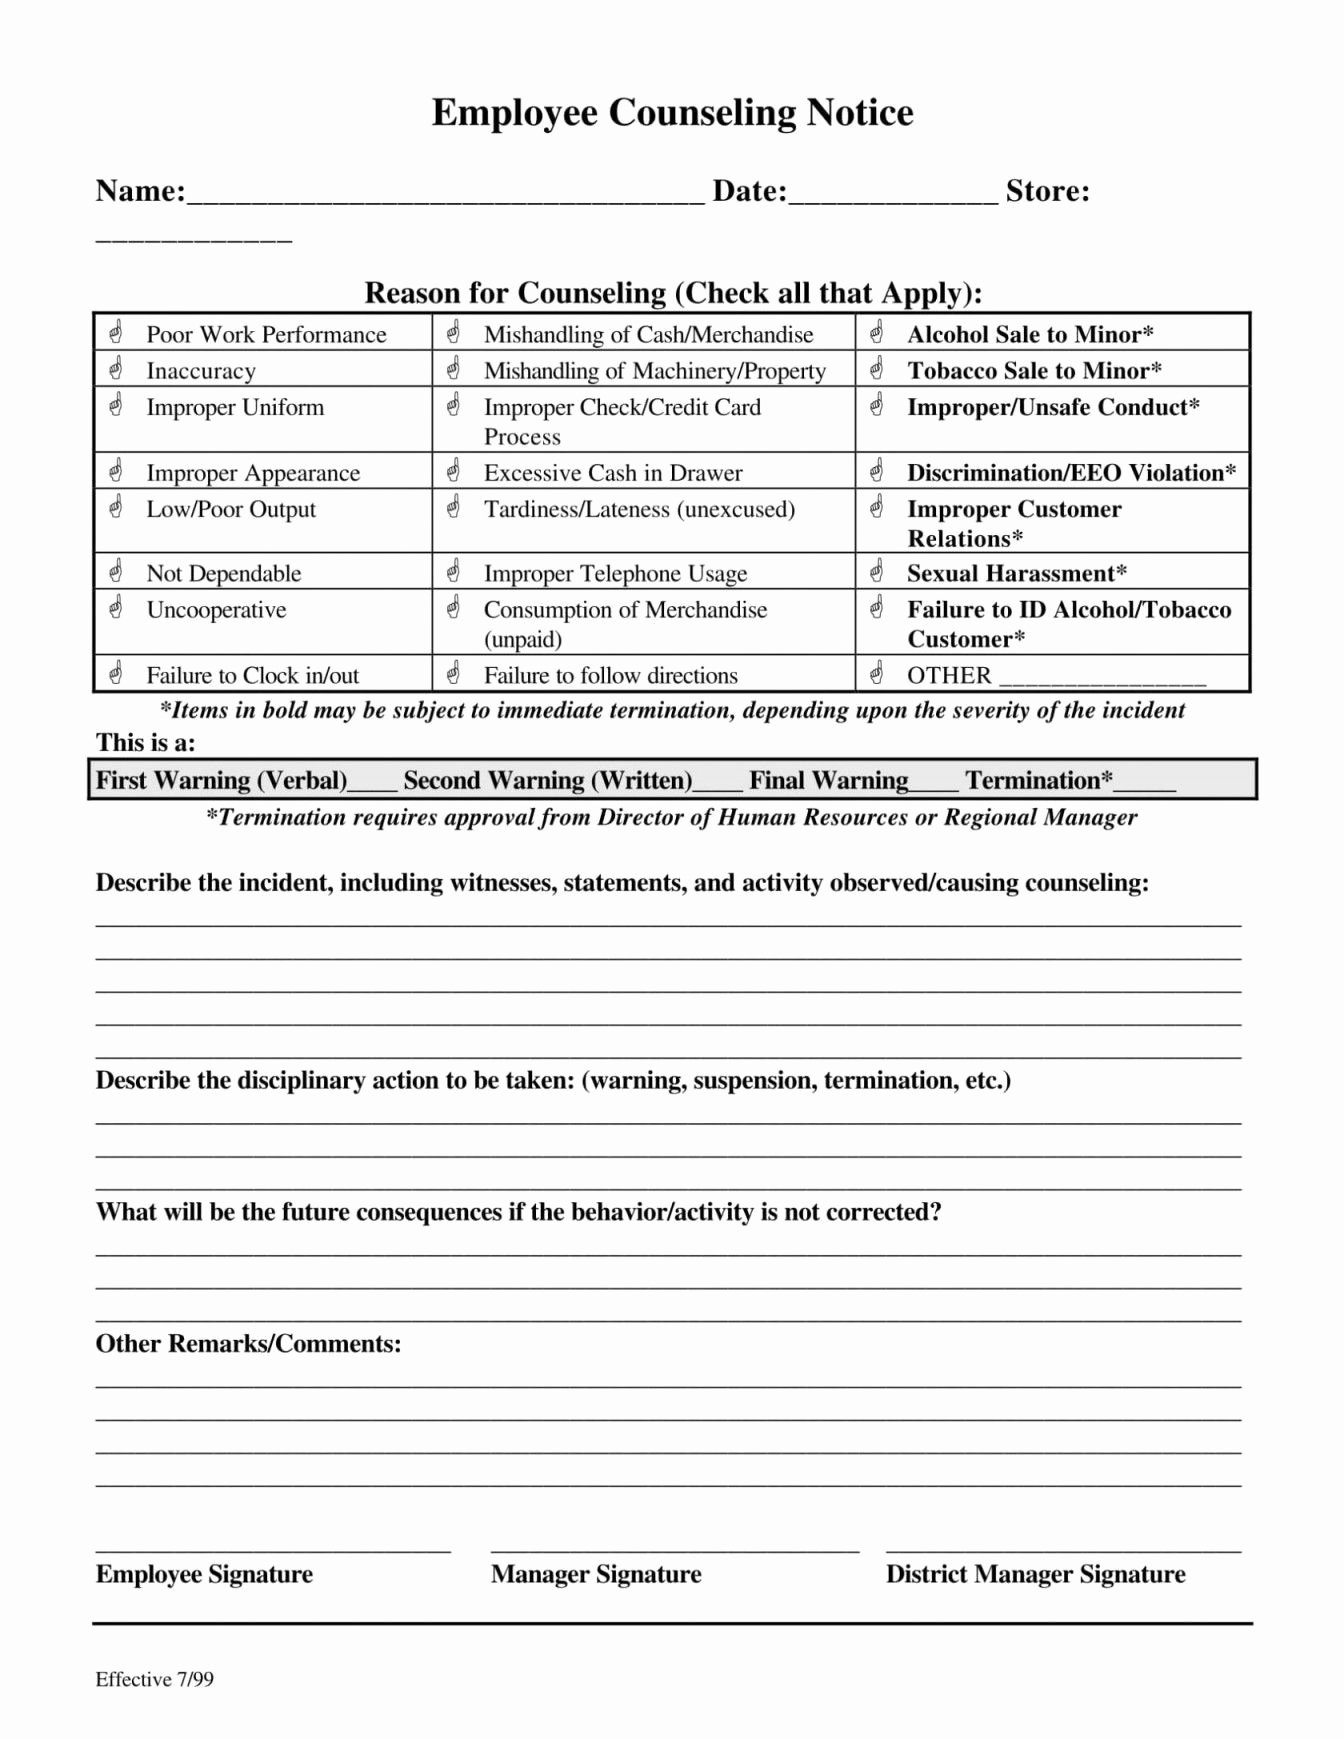 Employee Counseling form Template New Employee Counseling form